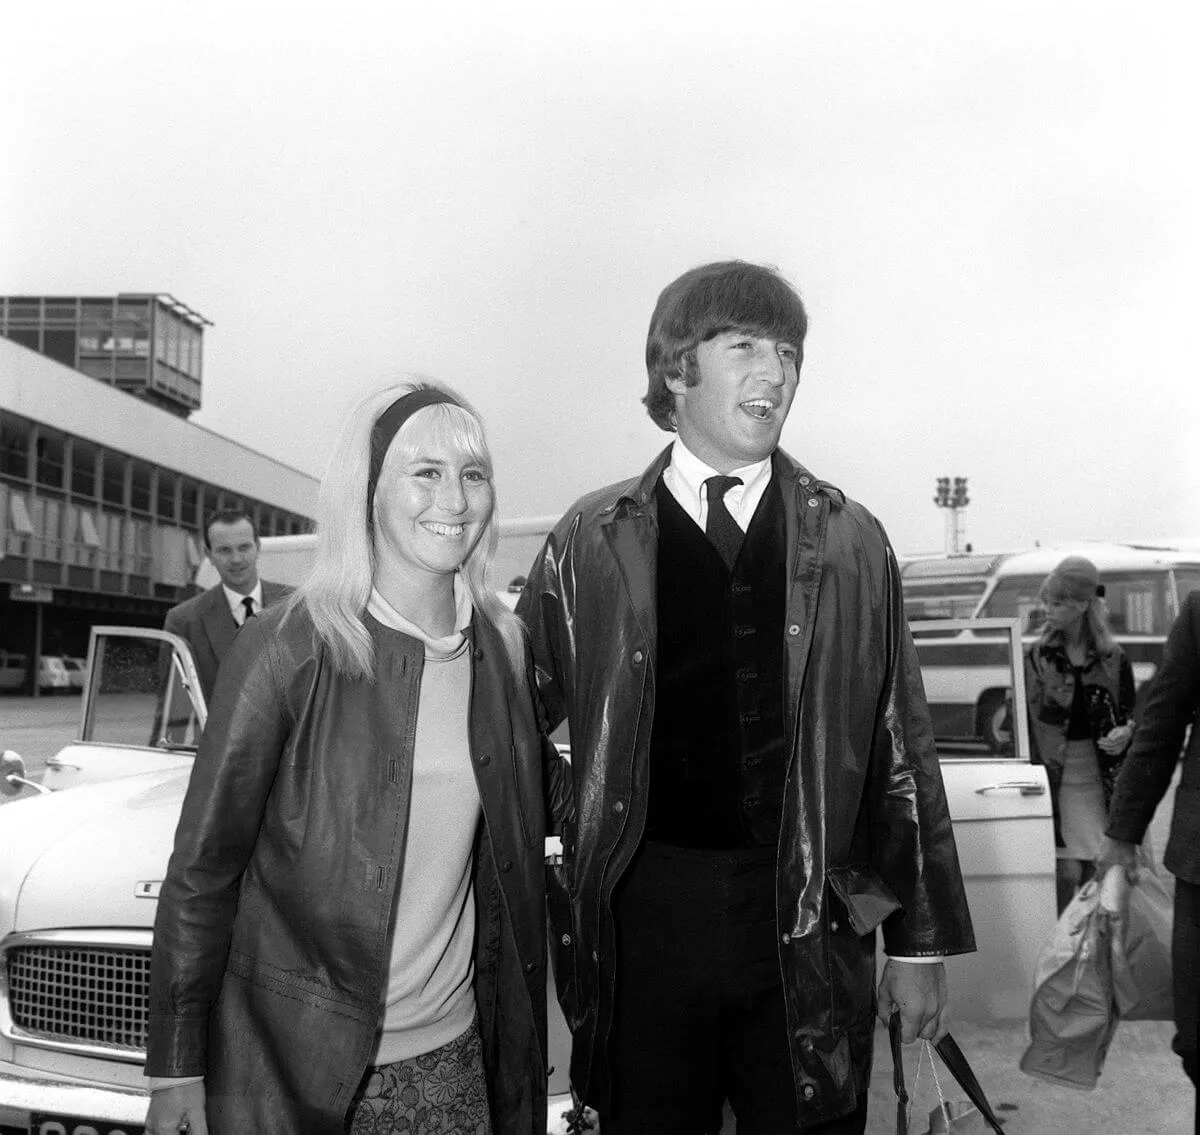 A black and white picture of Cynthia and John Lennon walking outside at an airport.